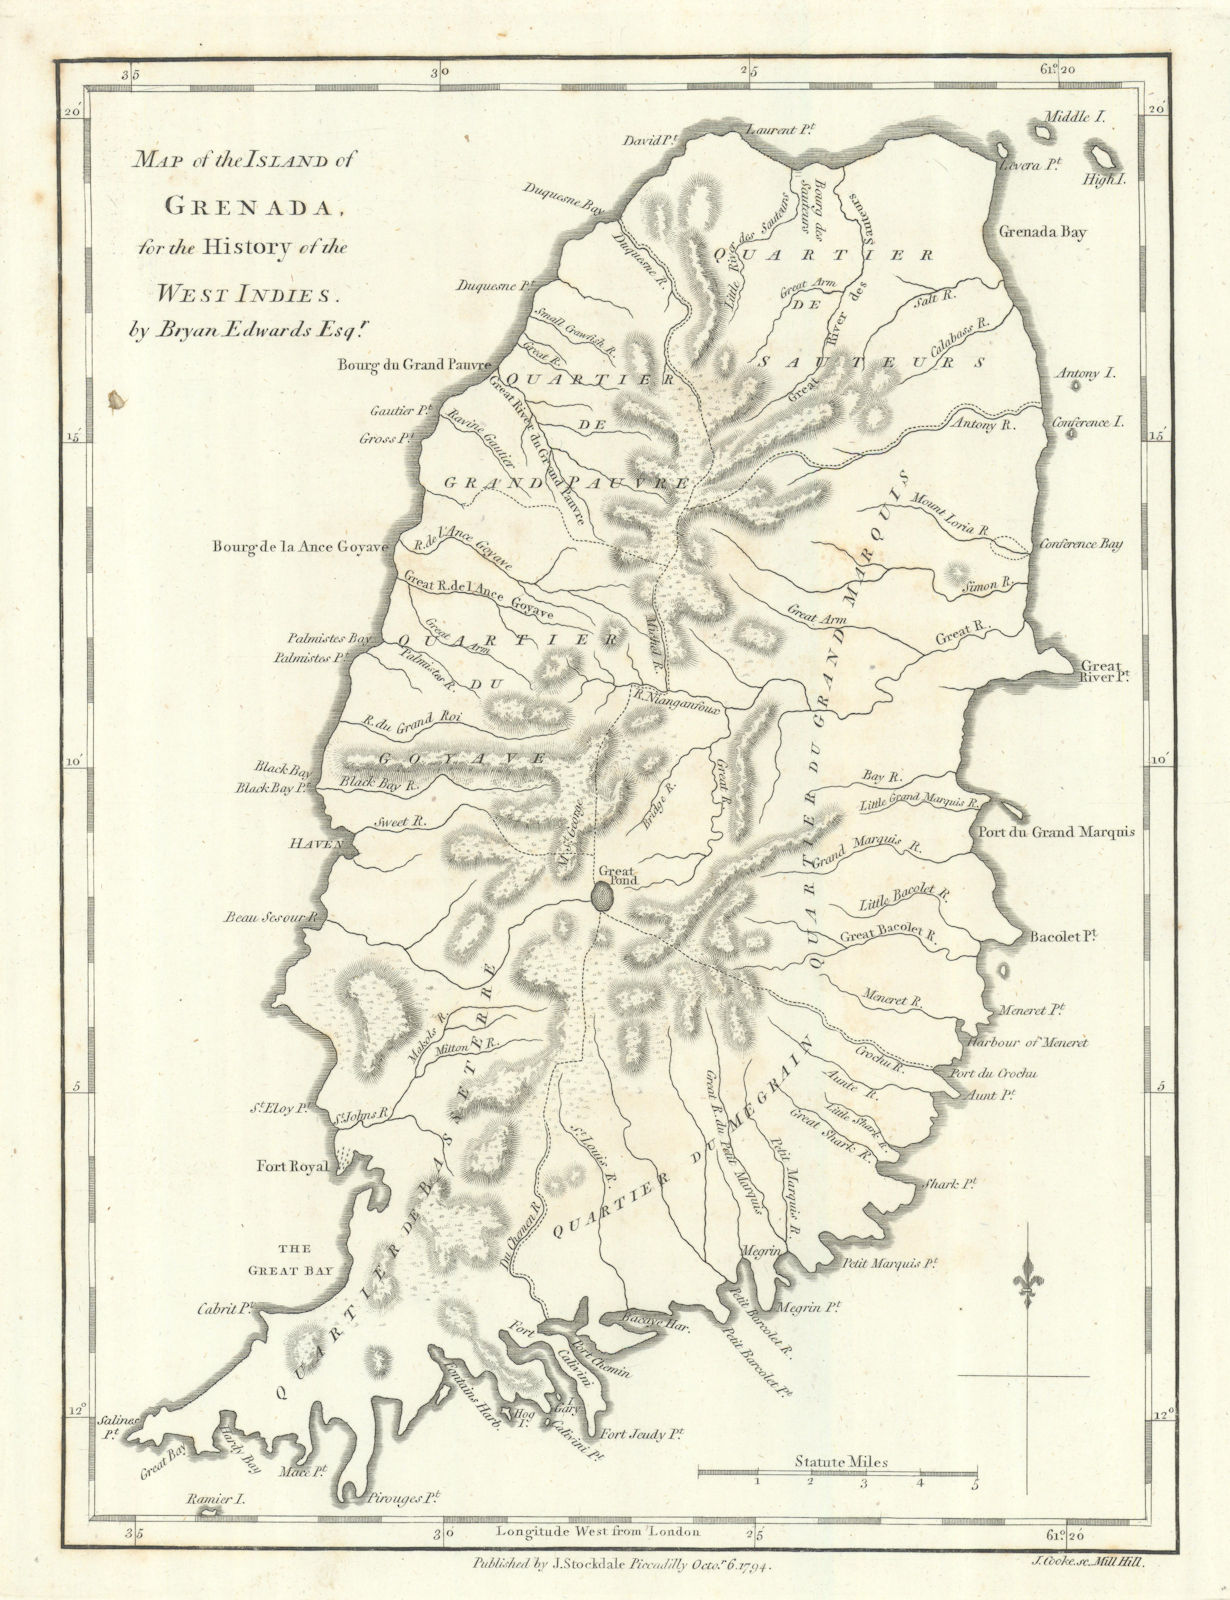 'A Map of the Island of GRENADA', by Bryan EDWARDS. West Indies. Caribbean 1794